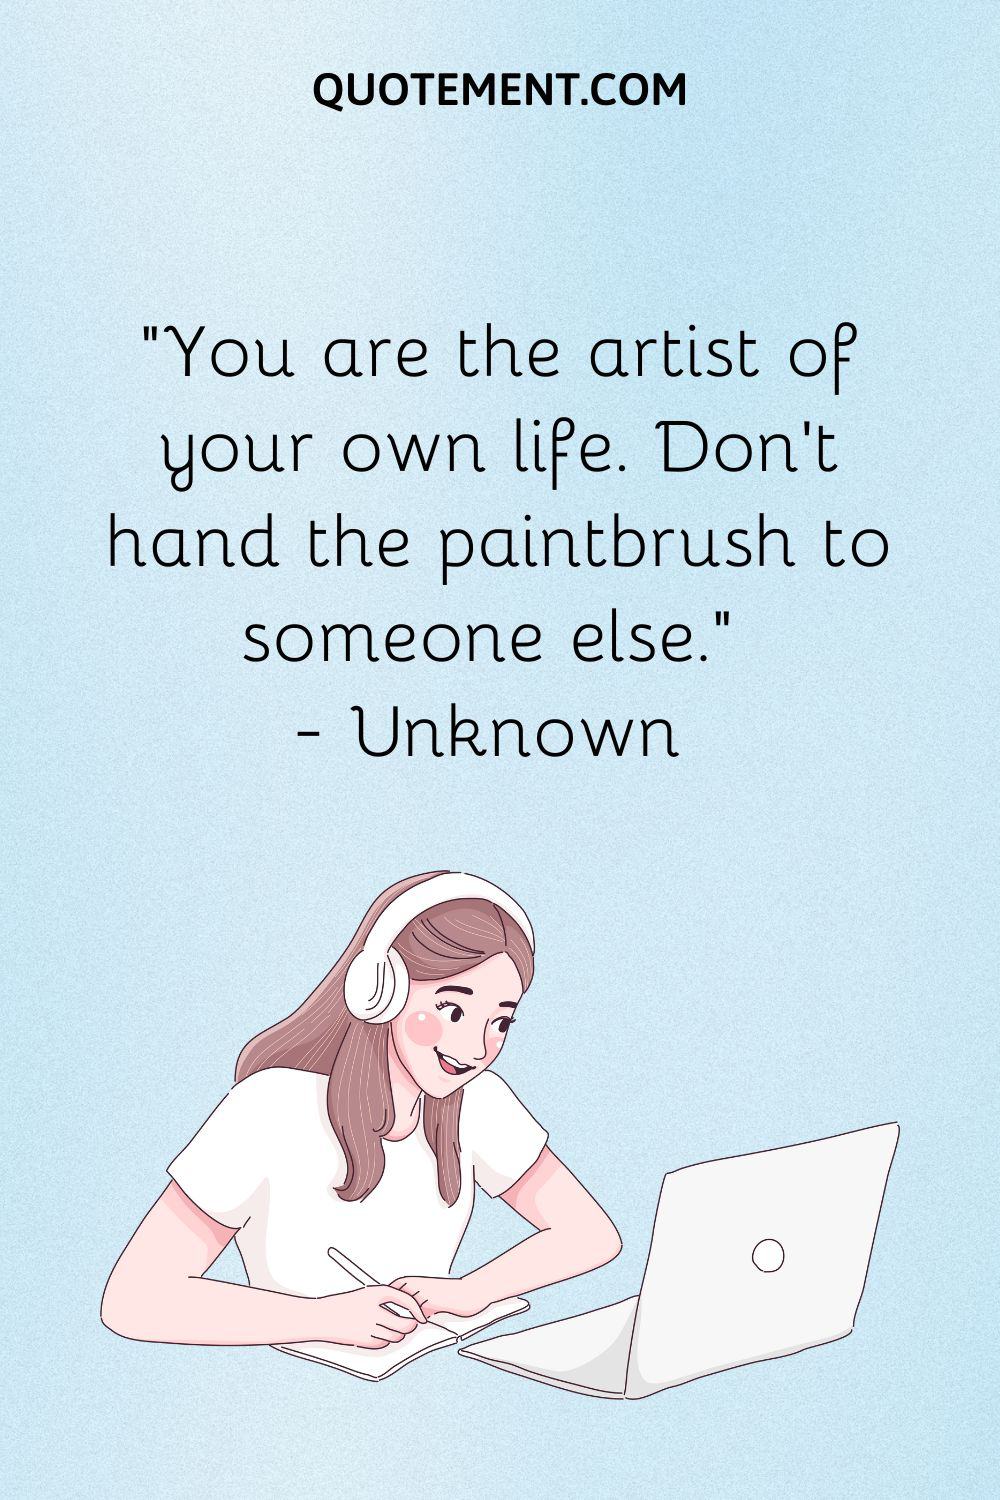 You are the artist of your own life. Don’t hand the paintbrush to someone else